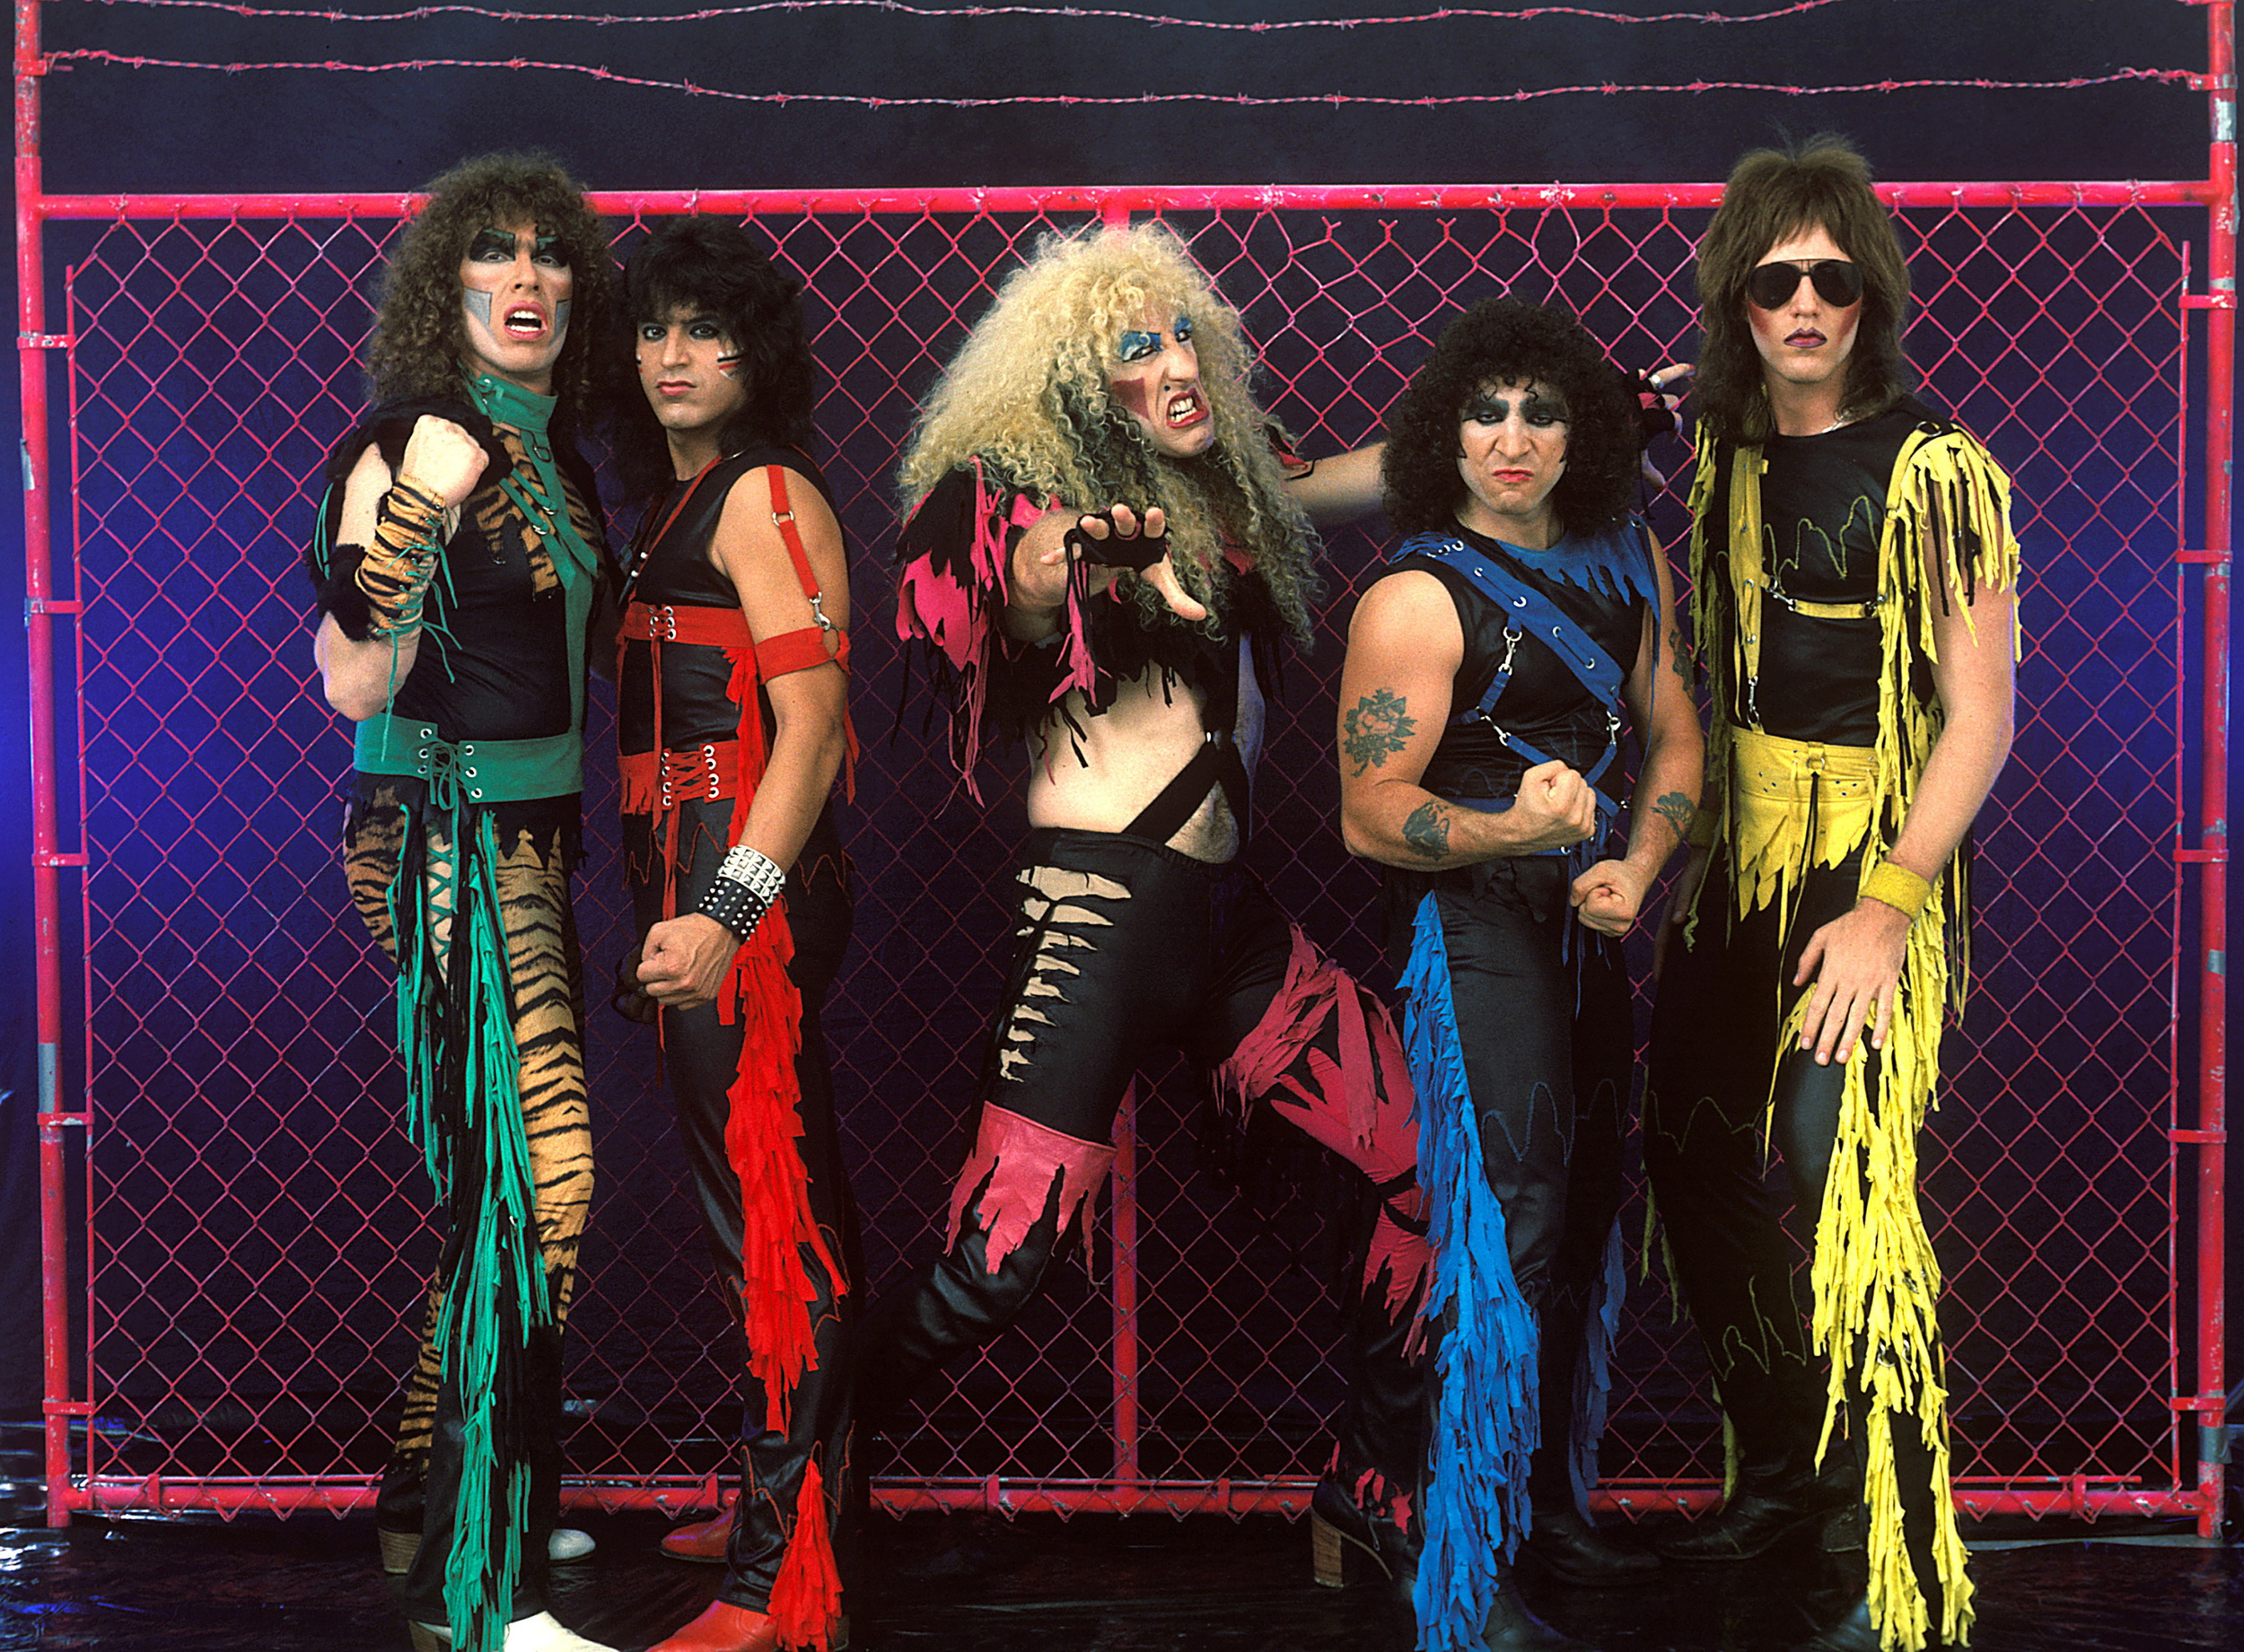 <p>Though legendary frontman Dee Snider thinks Twisted Sister should not be considered a hair metal band, it definitely qualifies. Yes, it was established before the scene took off, but it certainly looked the part and used MTV and the overall hair/glam rock movement to score its only commercially successful album with <em>Stay Hungry</em> (1984). Plus, this band never took itself seriously and had a good time with the music and videos, as evident by the smash <a href="https://www.youtube.com/watch?v=V9AbeALNVkk">"We're Not Gonna Take It."</a></p><p><a href='https://www.msn.com/en-us/community/channel/vid-cj9pqbr0vn9in2b6ddcd8sfgpfq6x6utp44fssrv6mc2gtybw0us'>Follow us on MSN to see more of our exclusive entertainment content.</a></p>